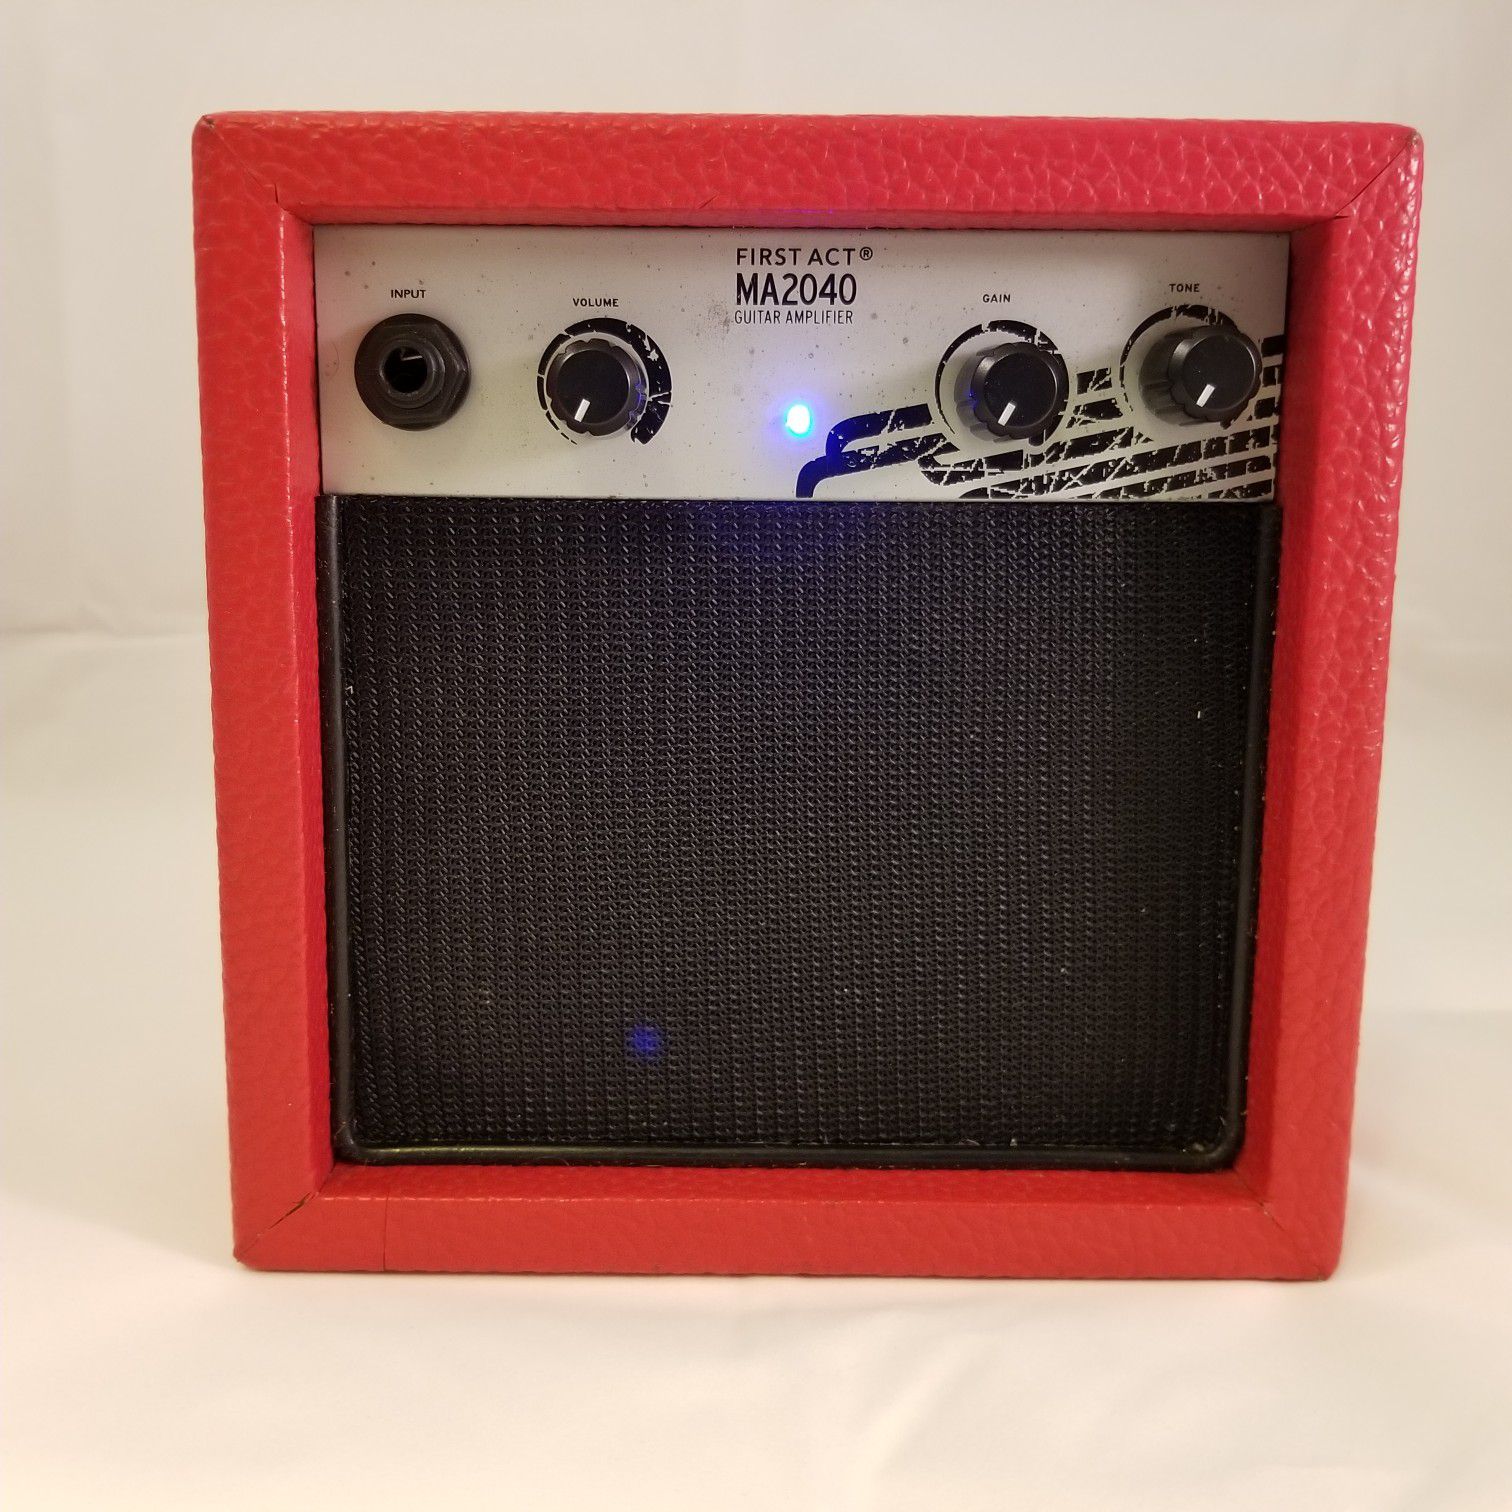 First Act MA2940 Mini Guitar Amplifier